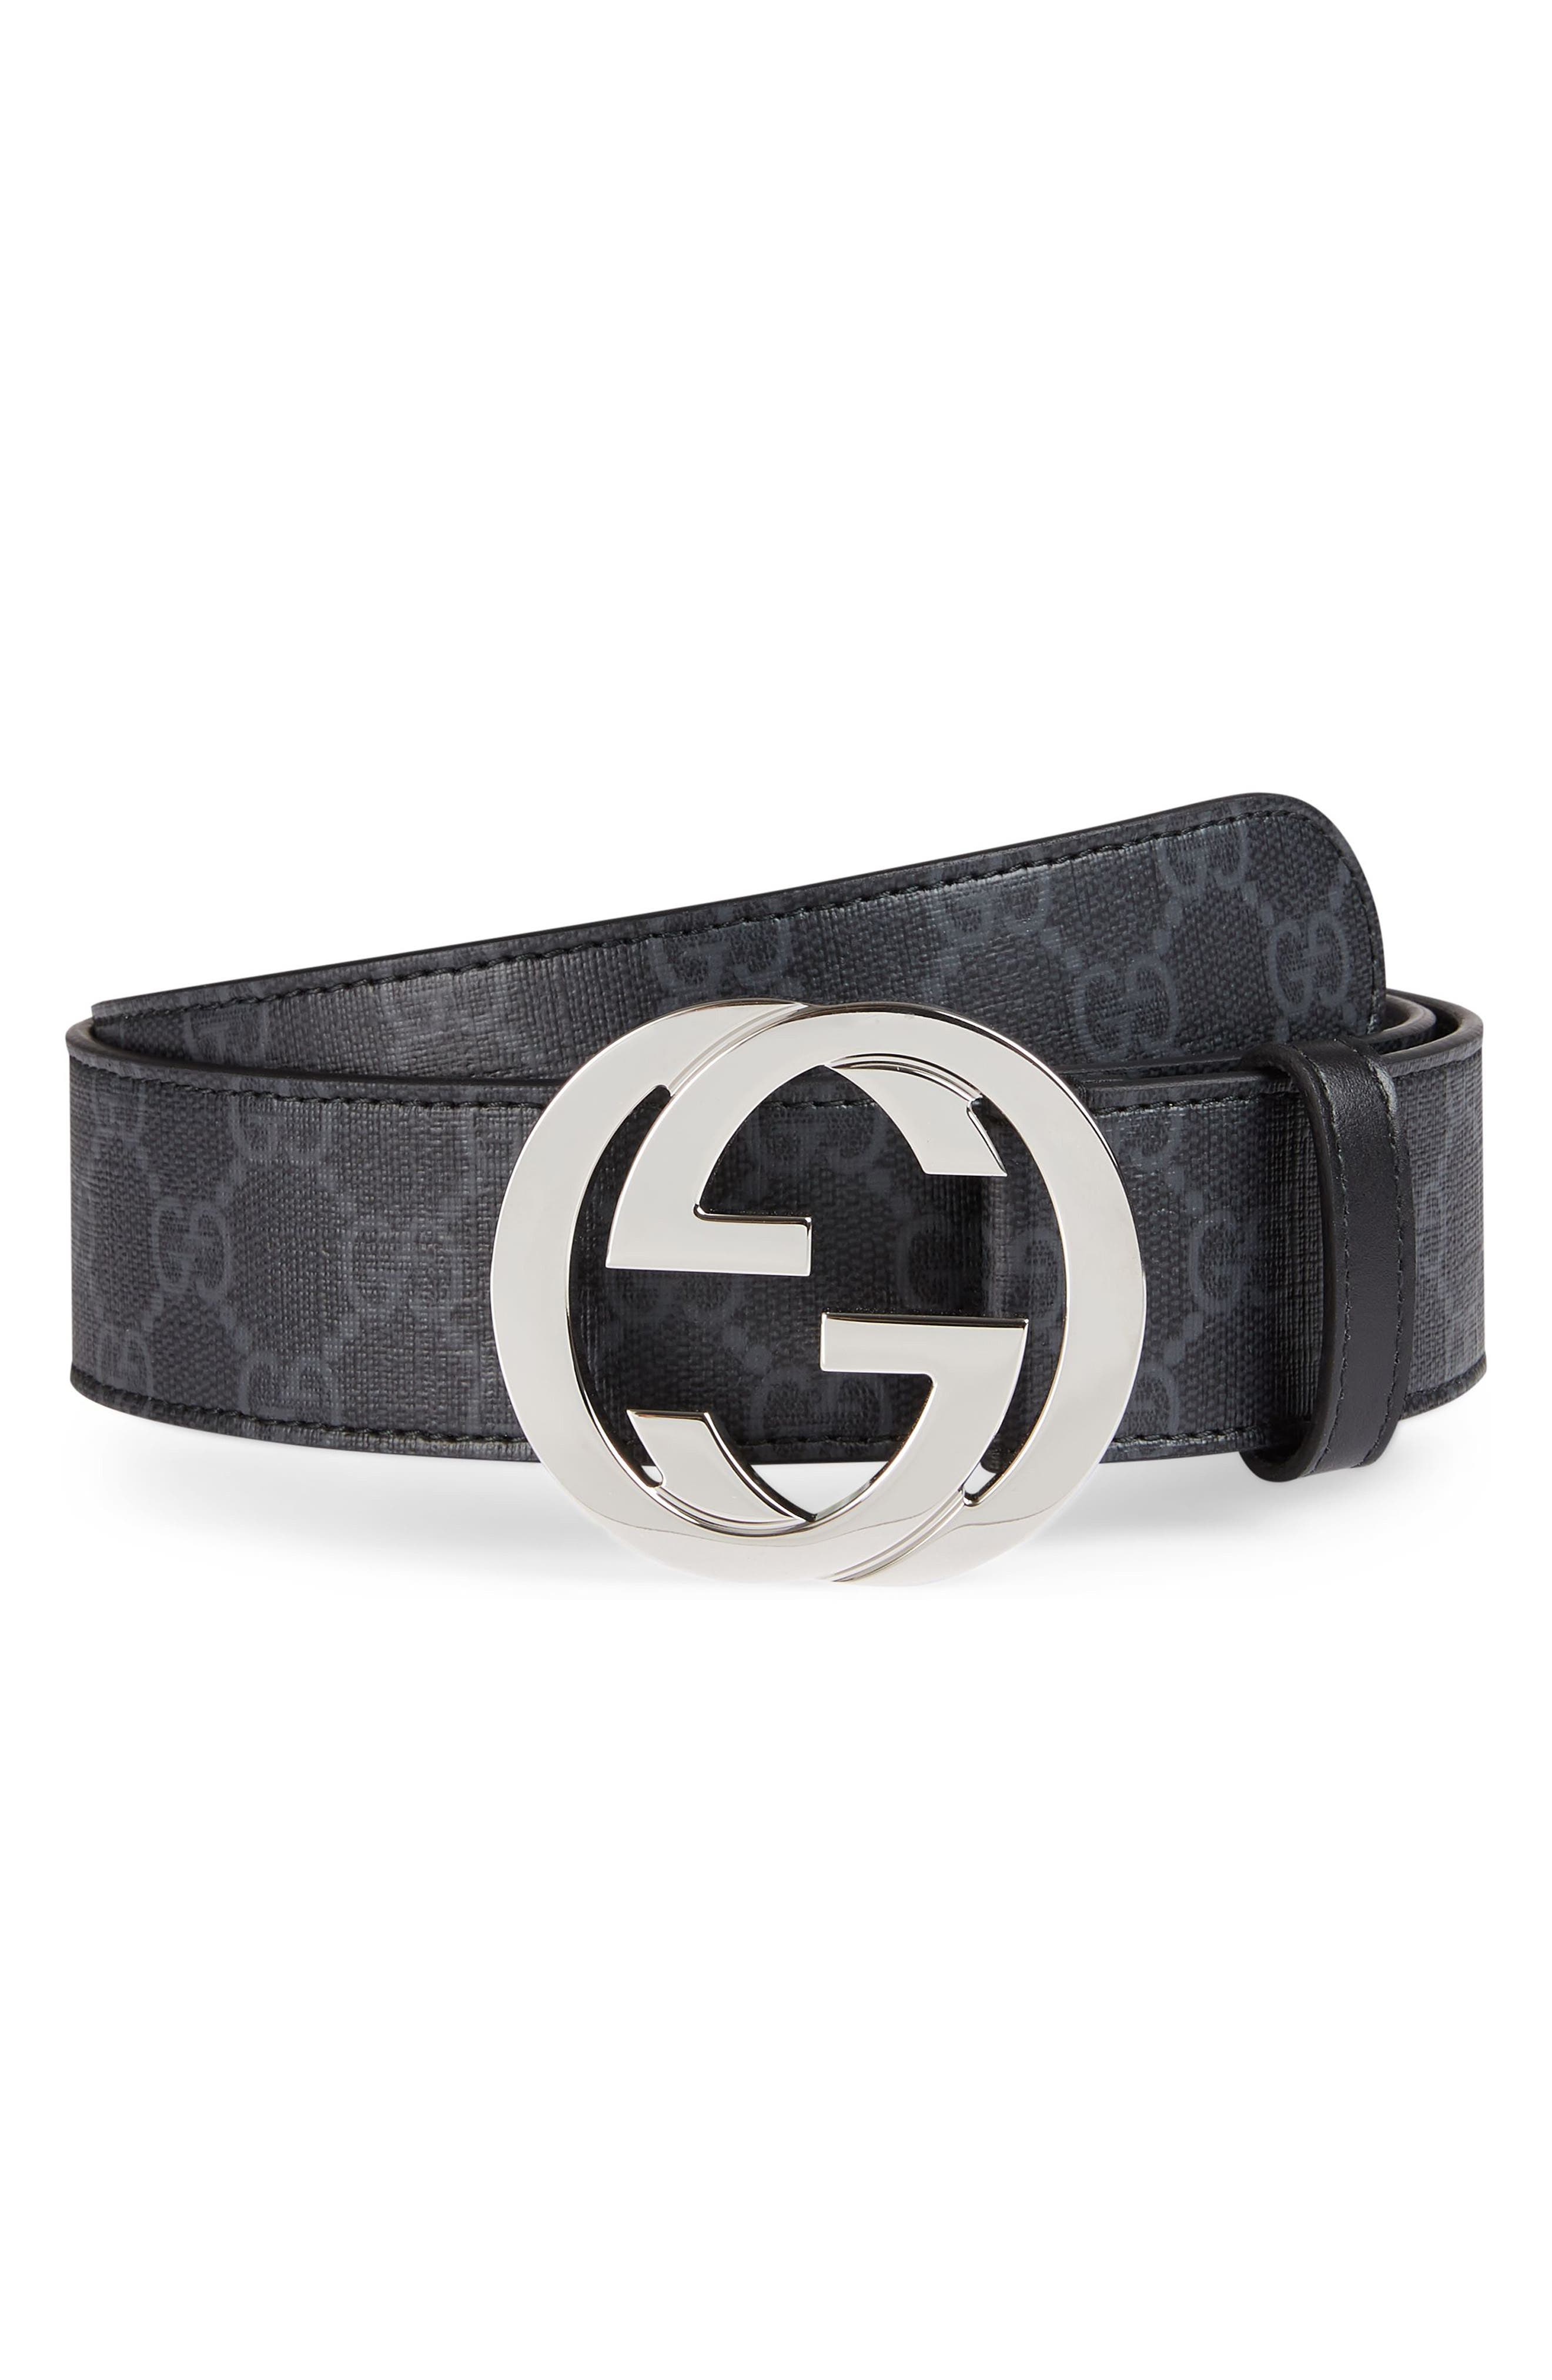 gucci belt with gucci on buckle